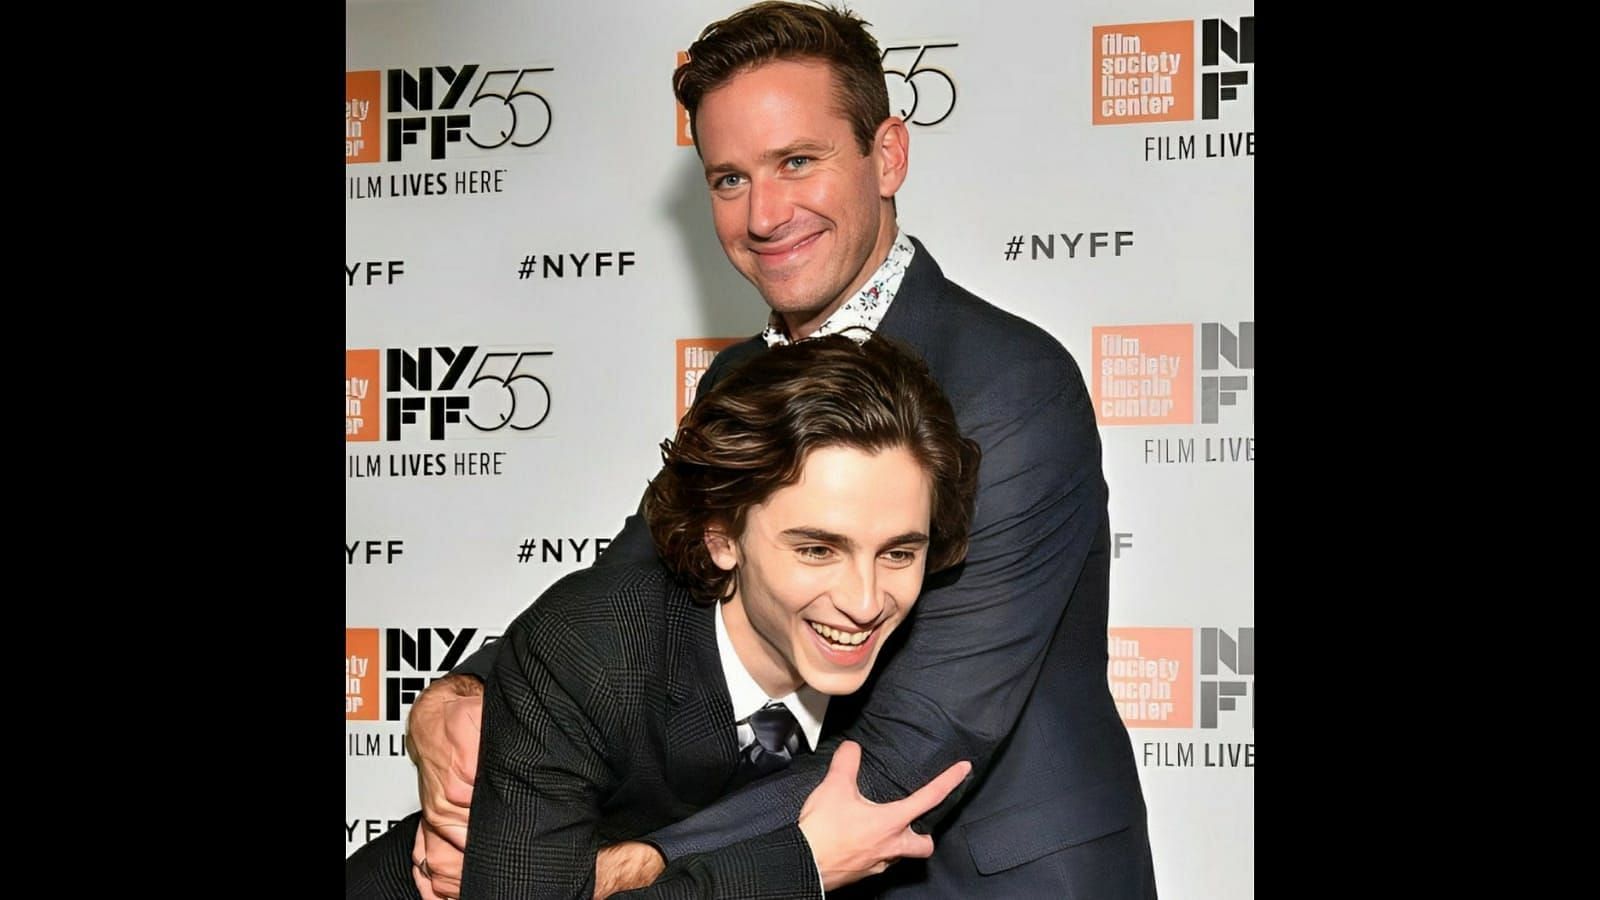 Timothee Chalamet called Armie Hammer allegations &quot;disorienting&quot; (Image via X/@DailyBasics135)